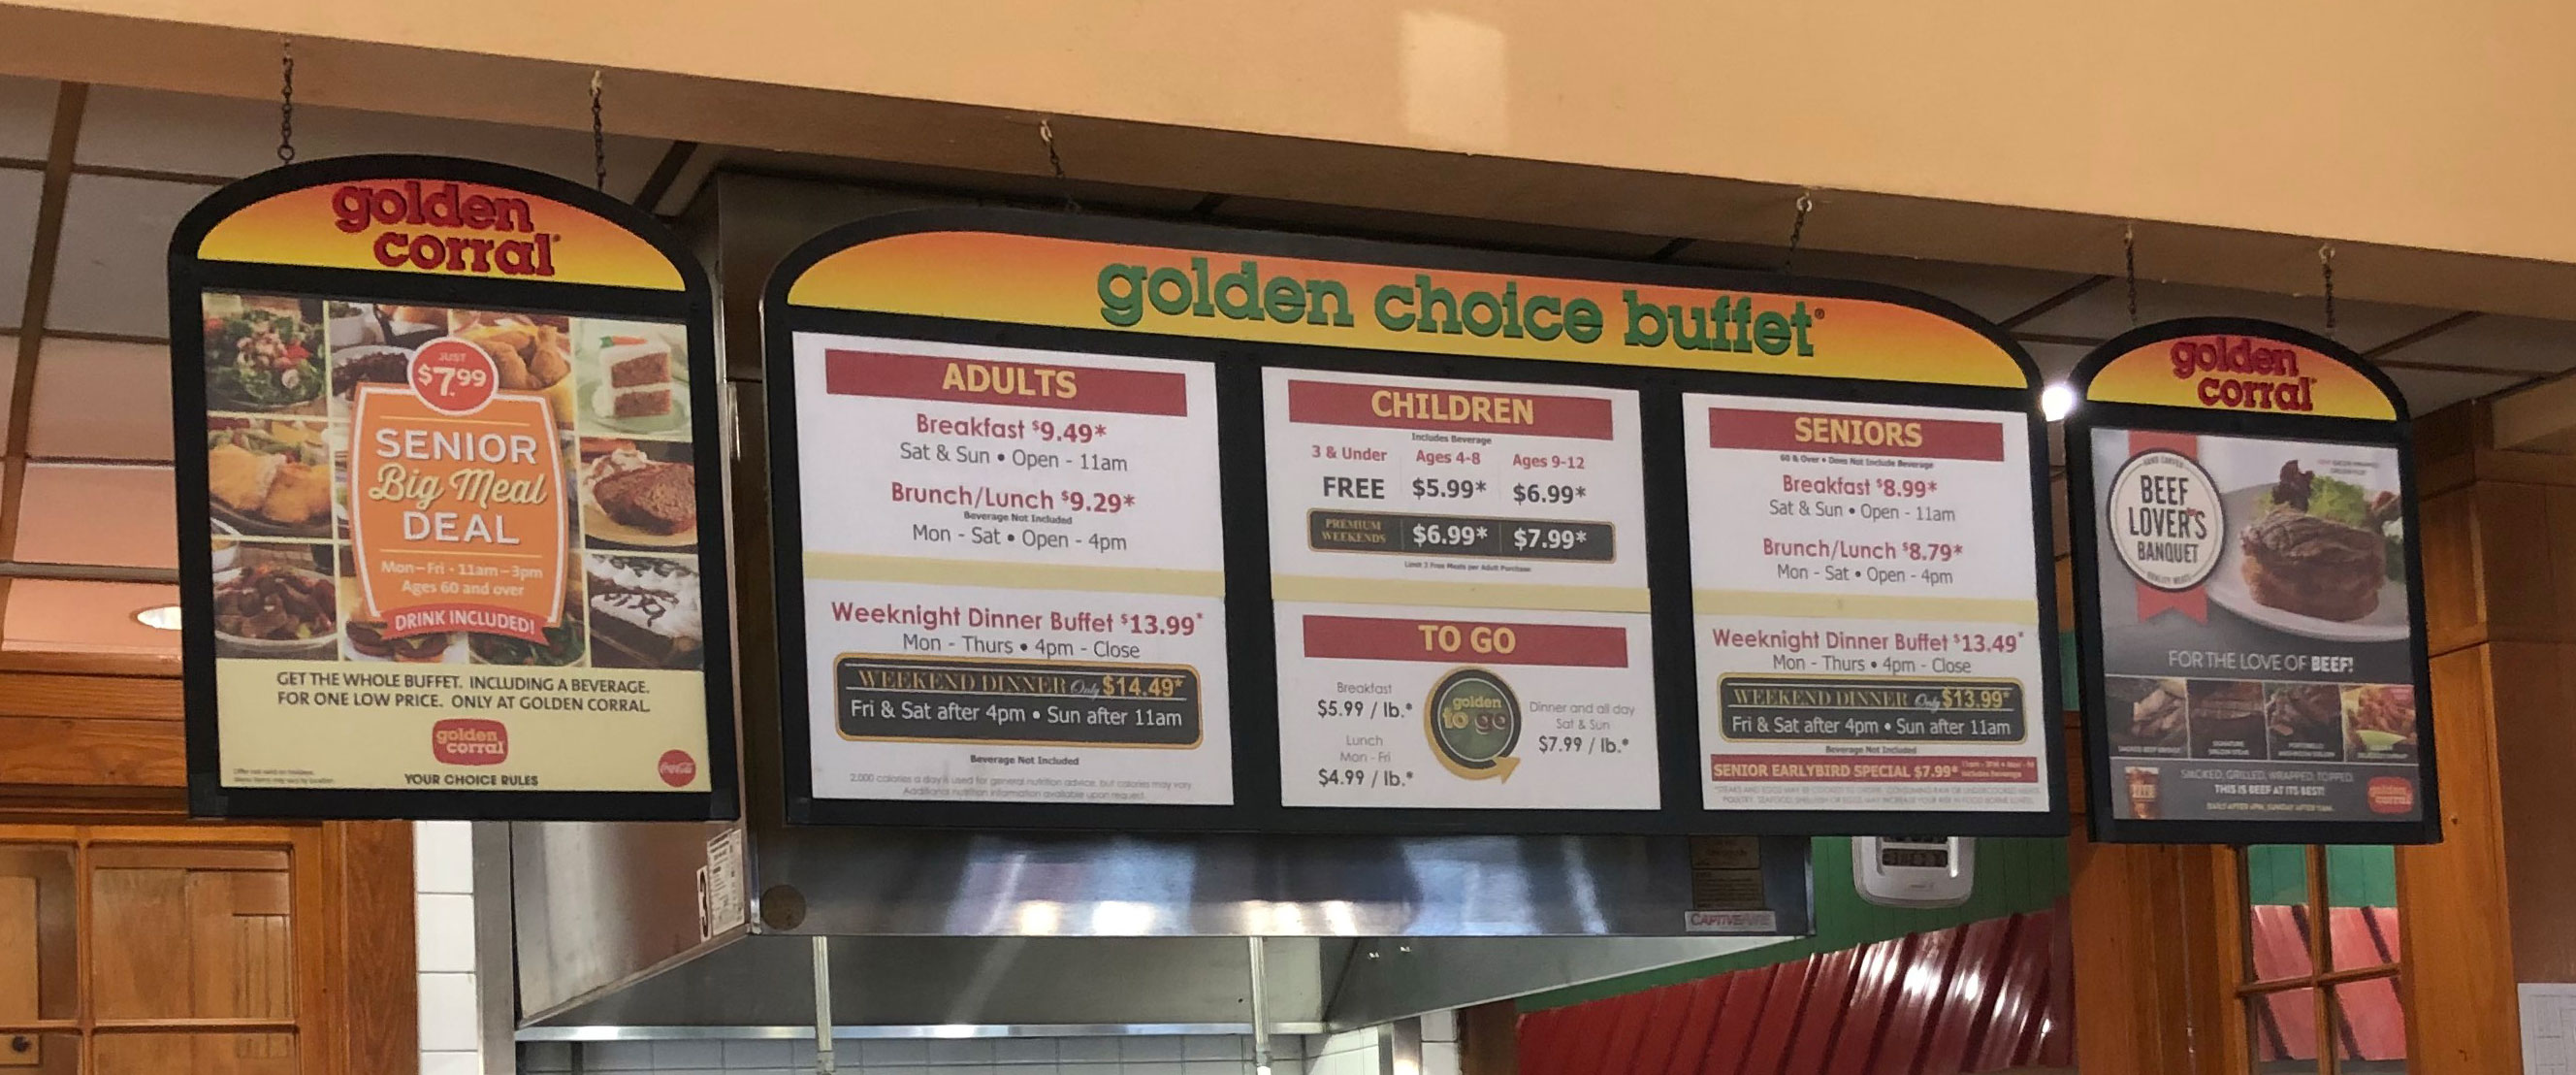 Golden Corral Prices Best Buffet Prices